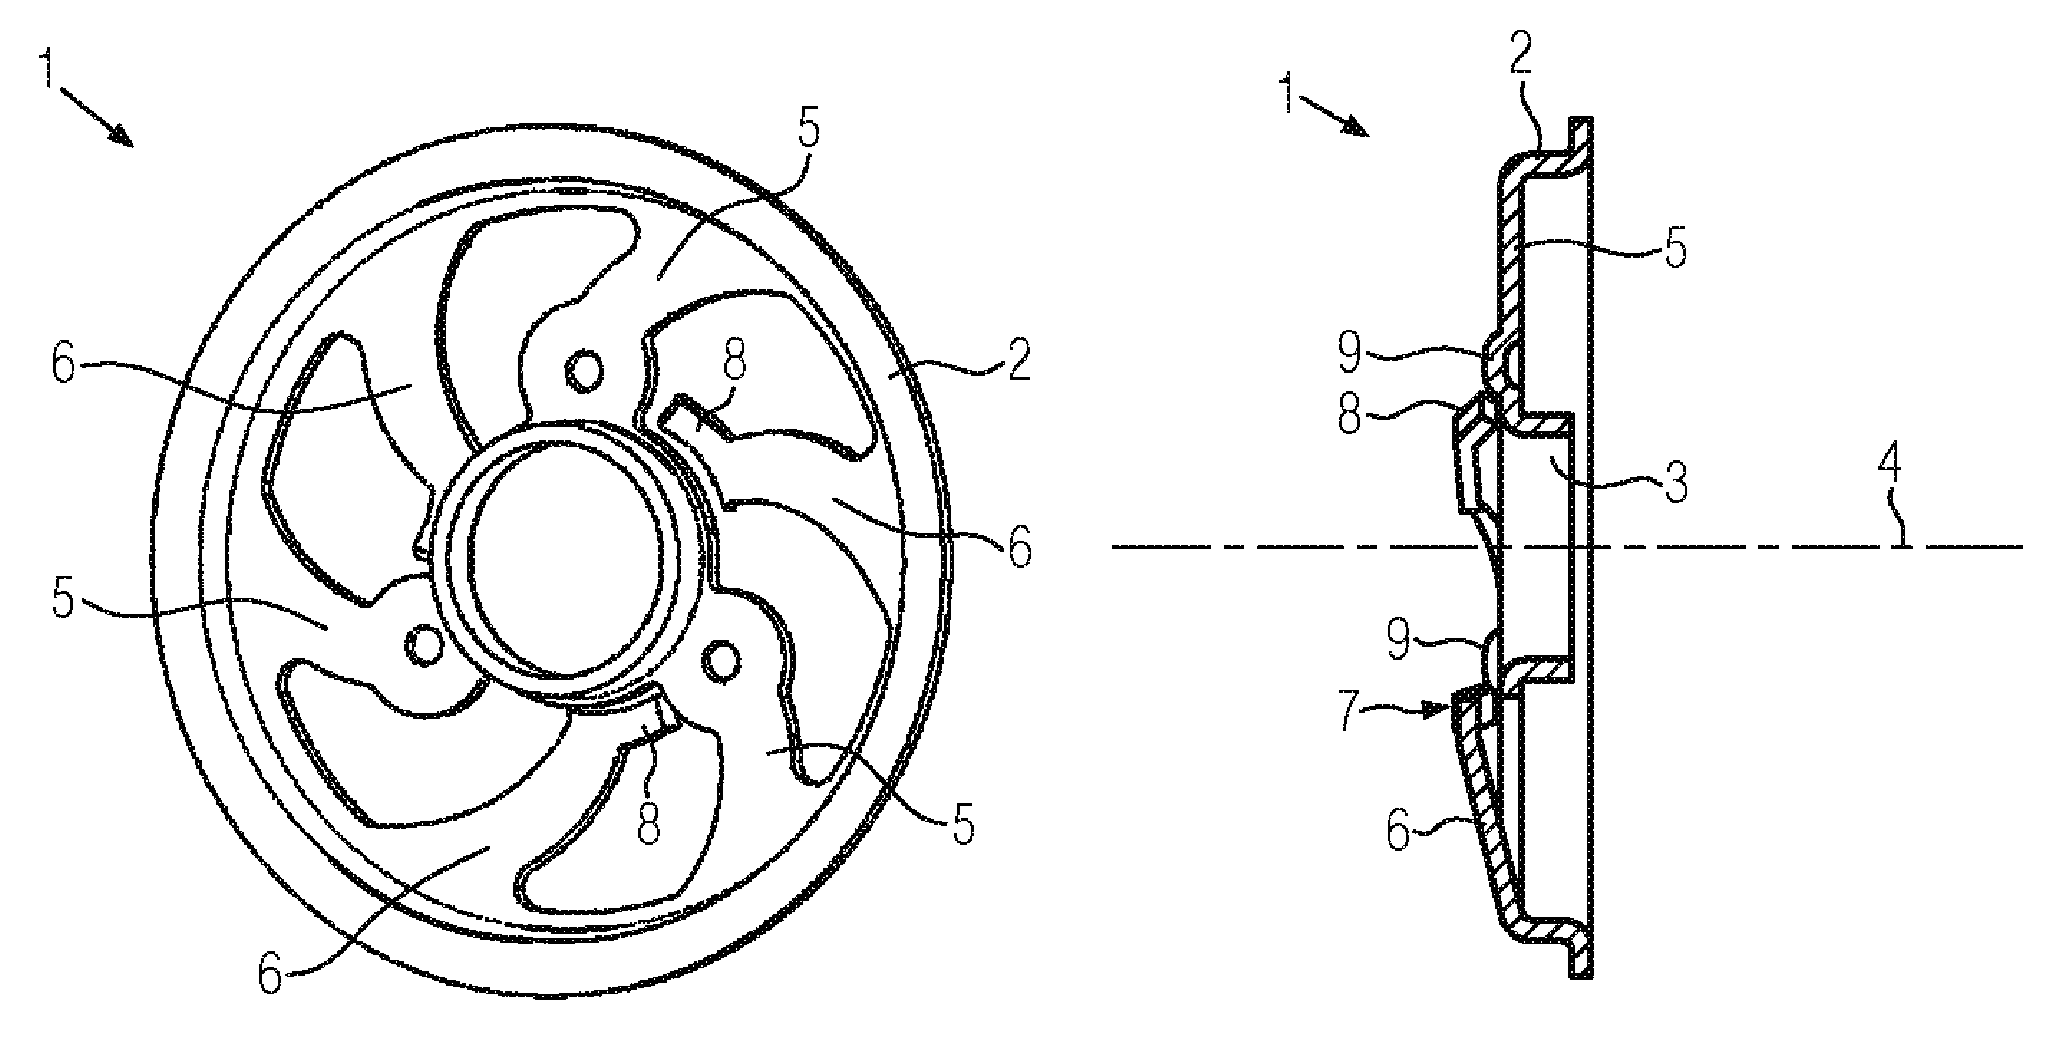 Spring washer and a bearing block including a spring washer